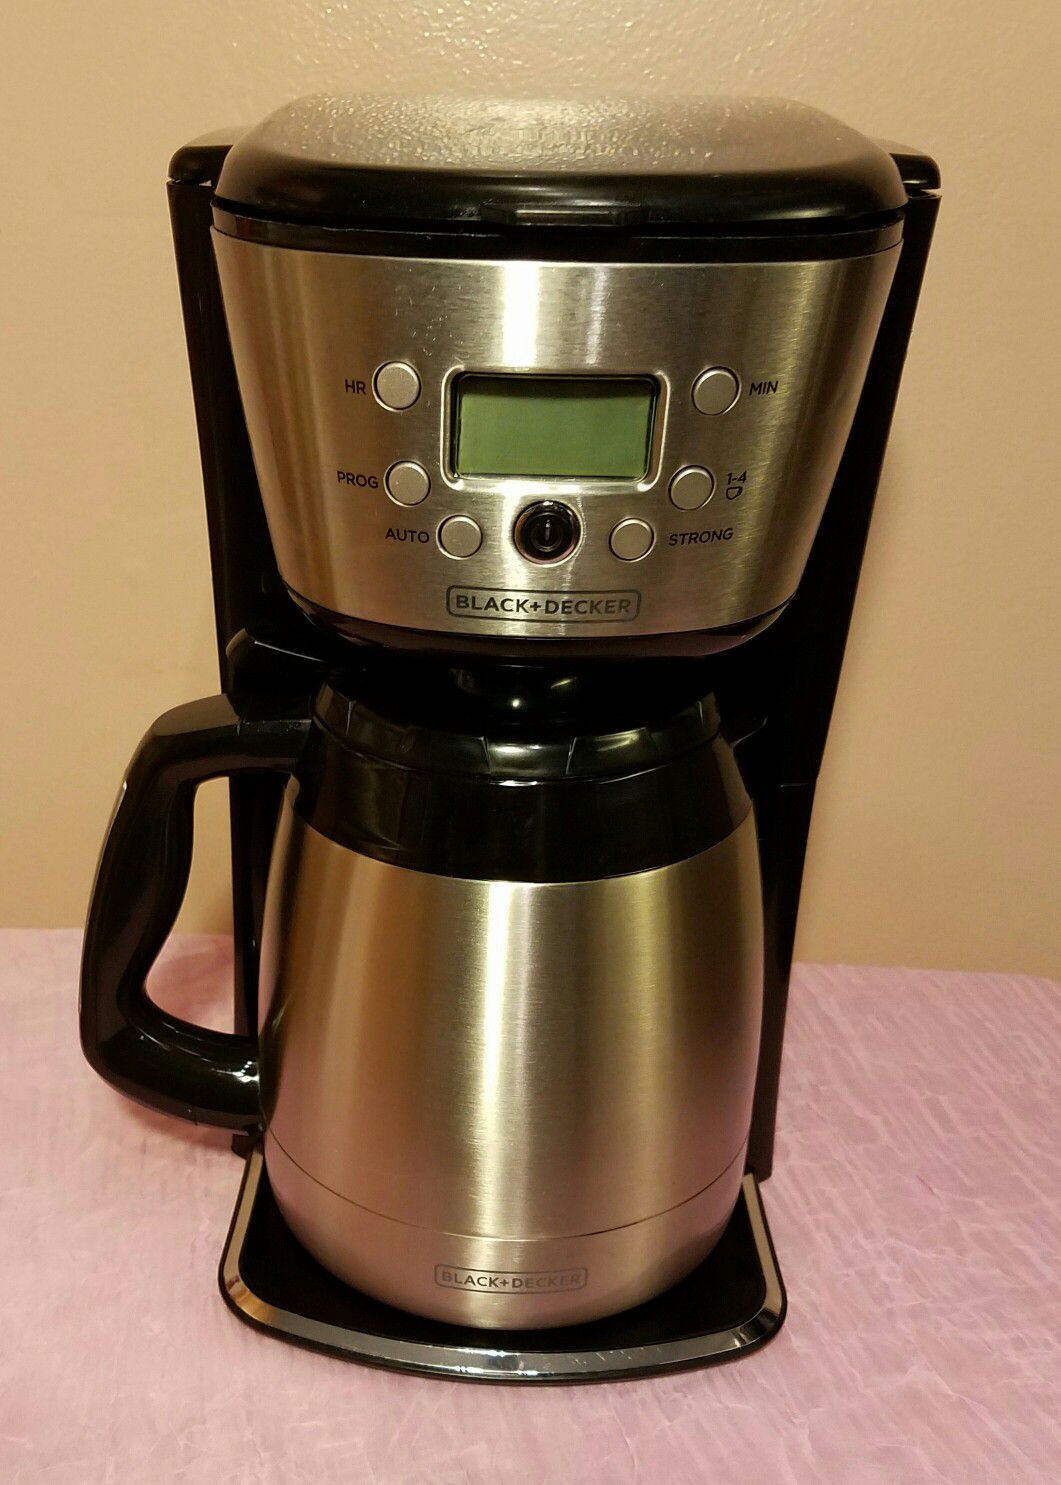 BLACK & DECKER 12-Cup Thermal Programmable Coffeemaker with FREE MUG